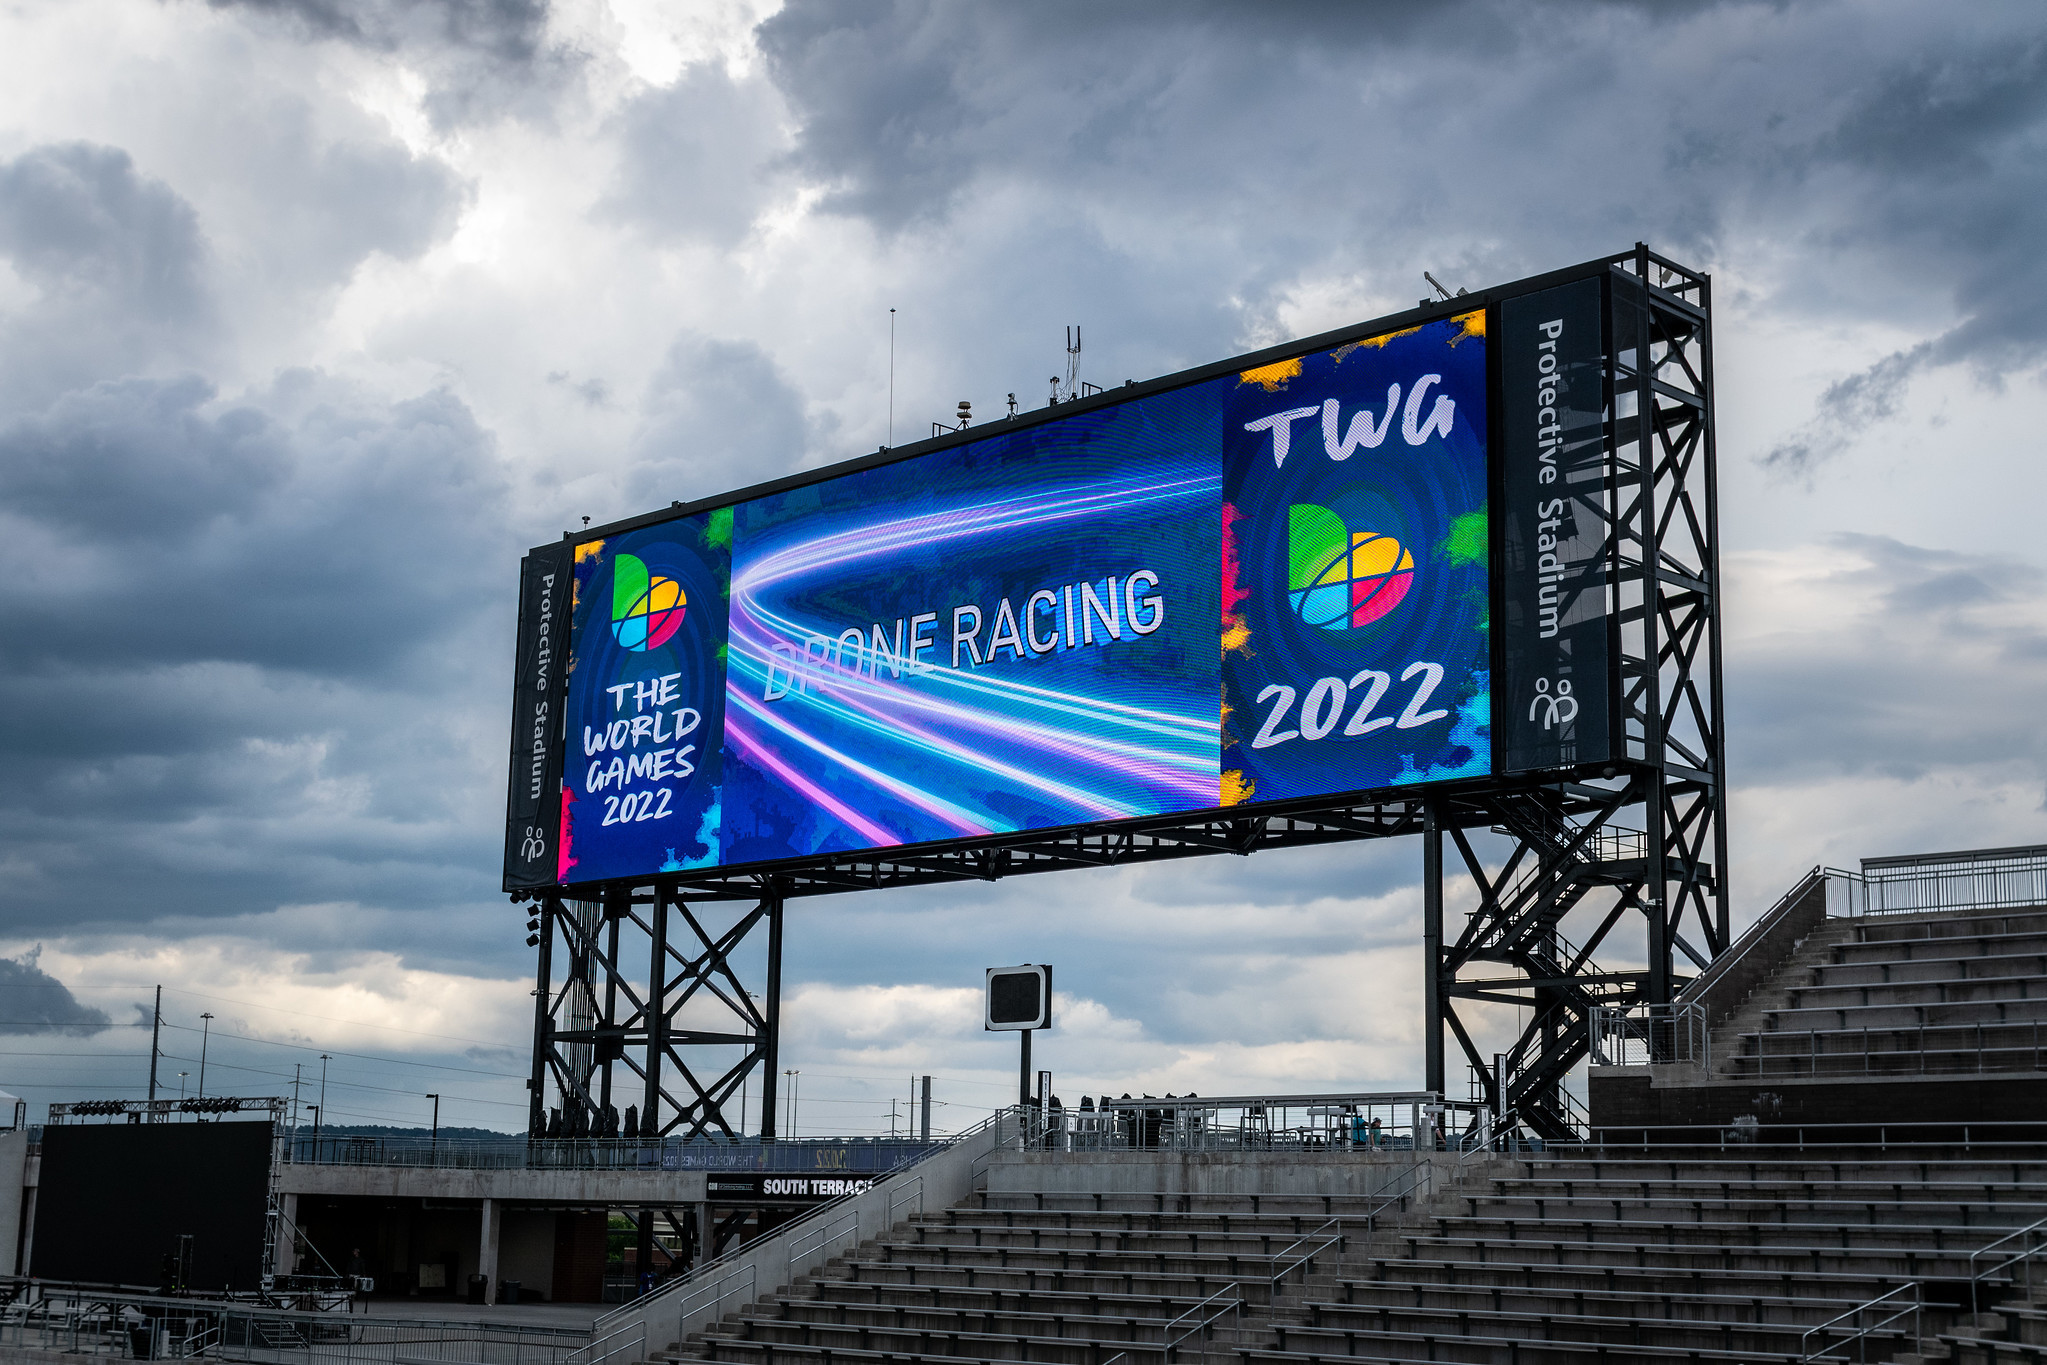 Drone racing at the Birmingham 2022 World Games was affected by poor weather ©World Games